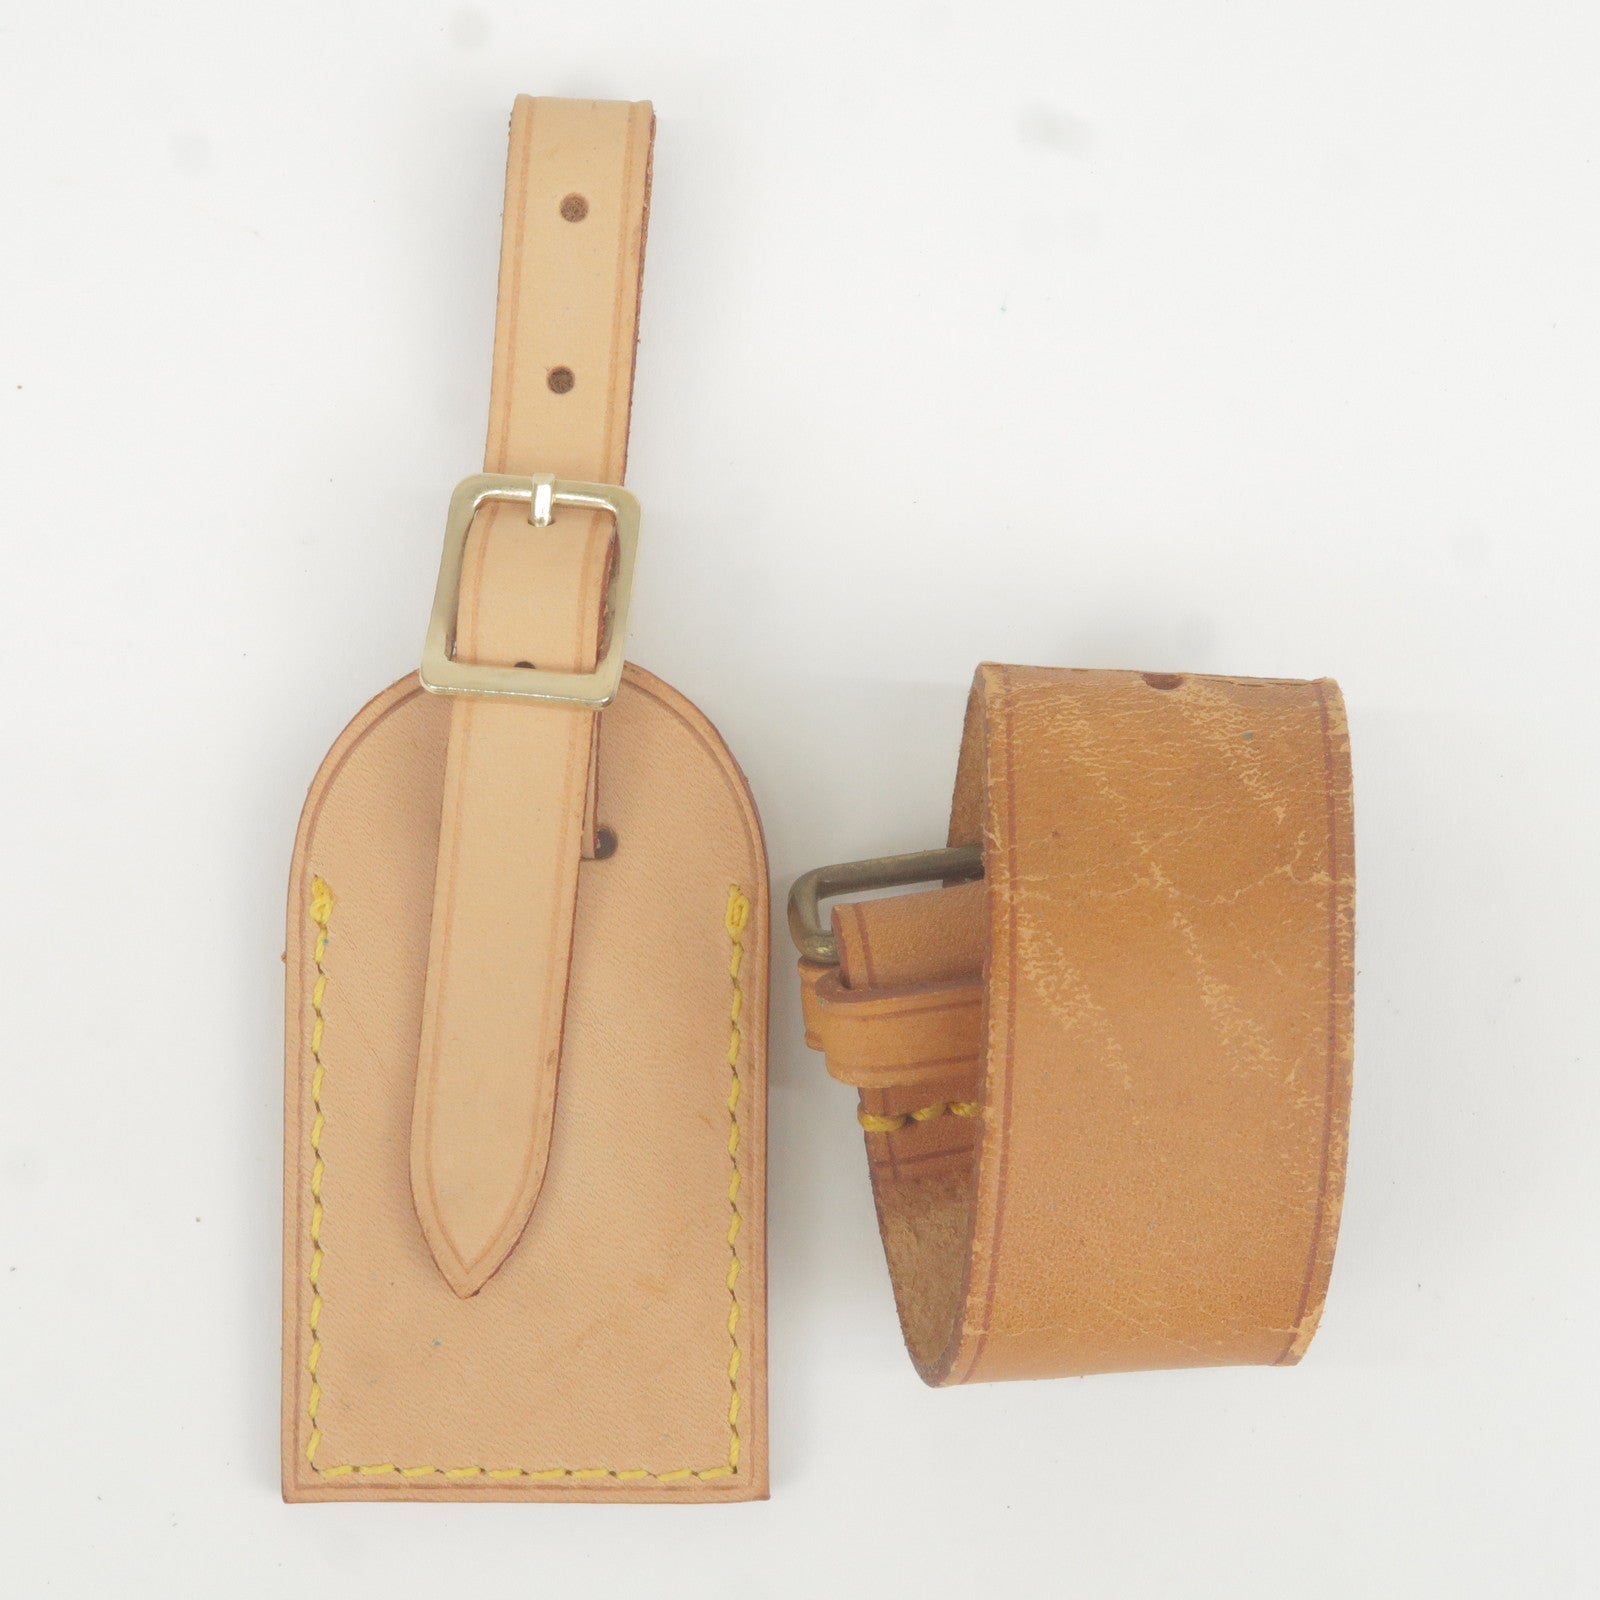 Authentic Louis Vuitton LV Name Tag and Poignet set Pre-owned.